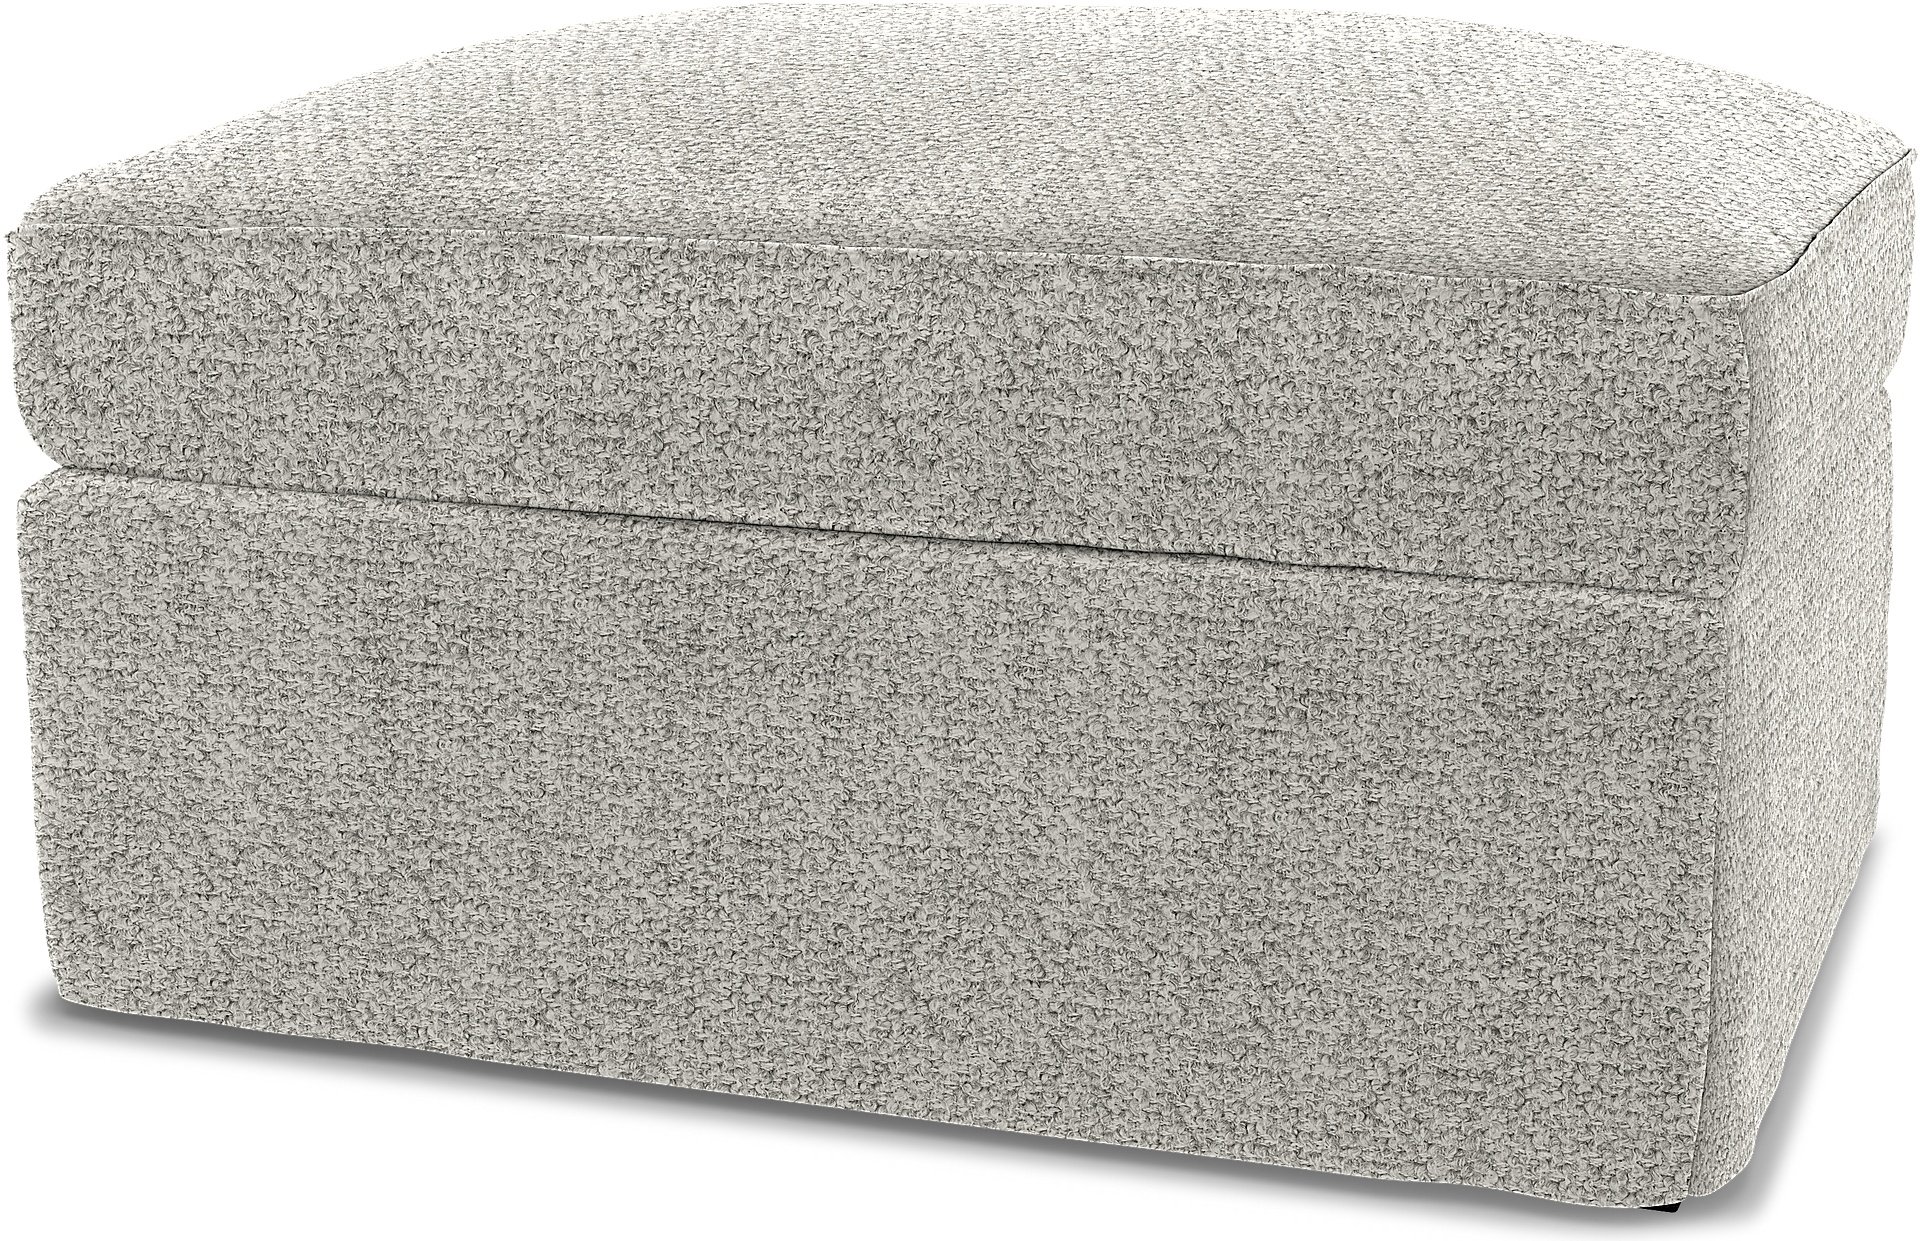 IKEA - Gronlid Footstool with Storage Cover, Driftwood, Boucle & Texture - Bemz